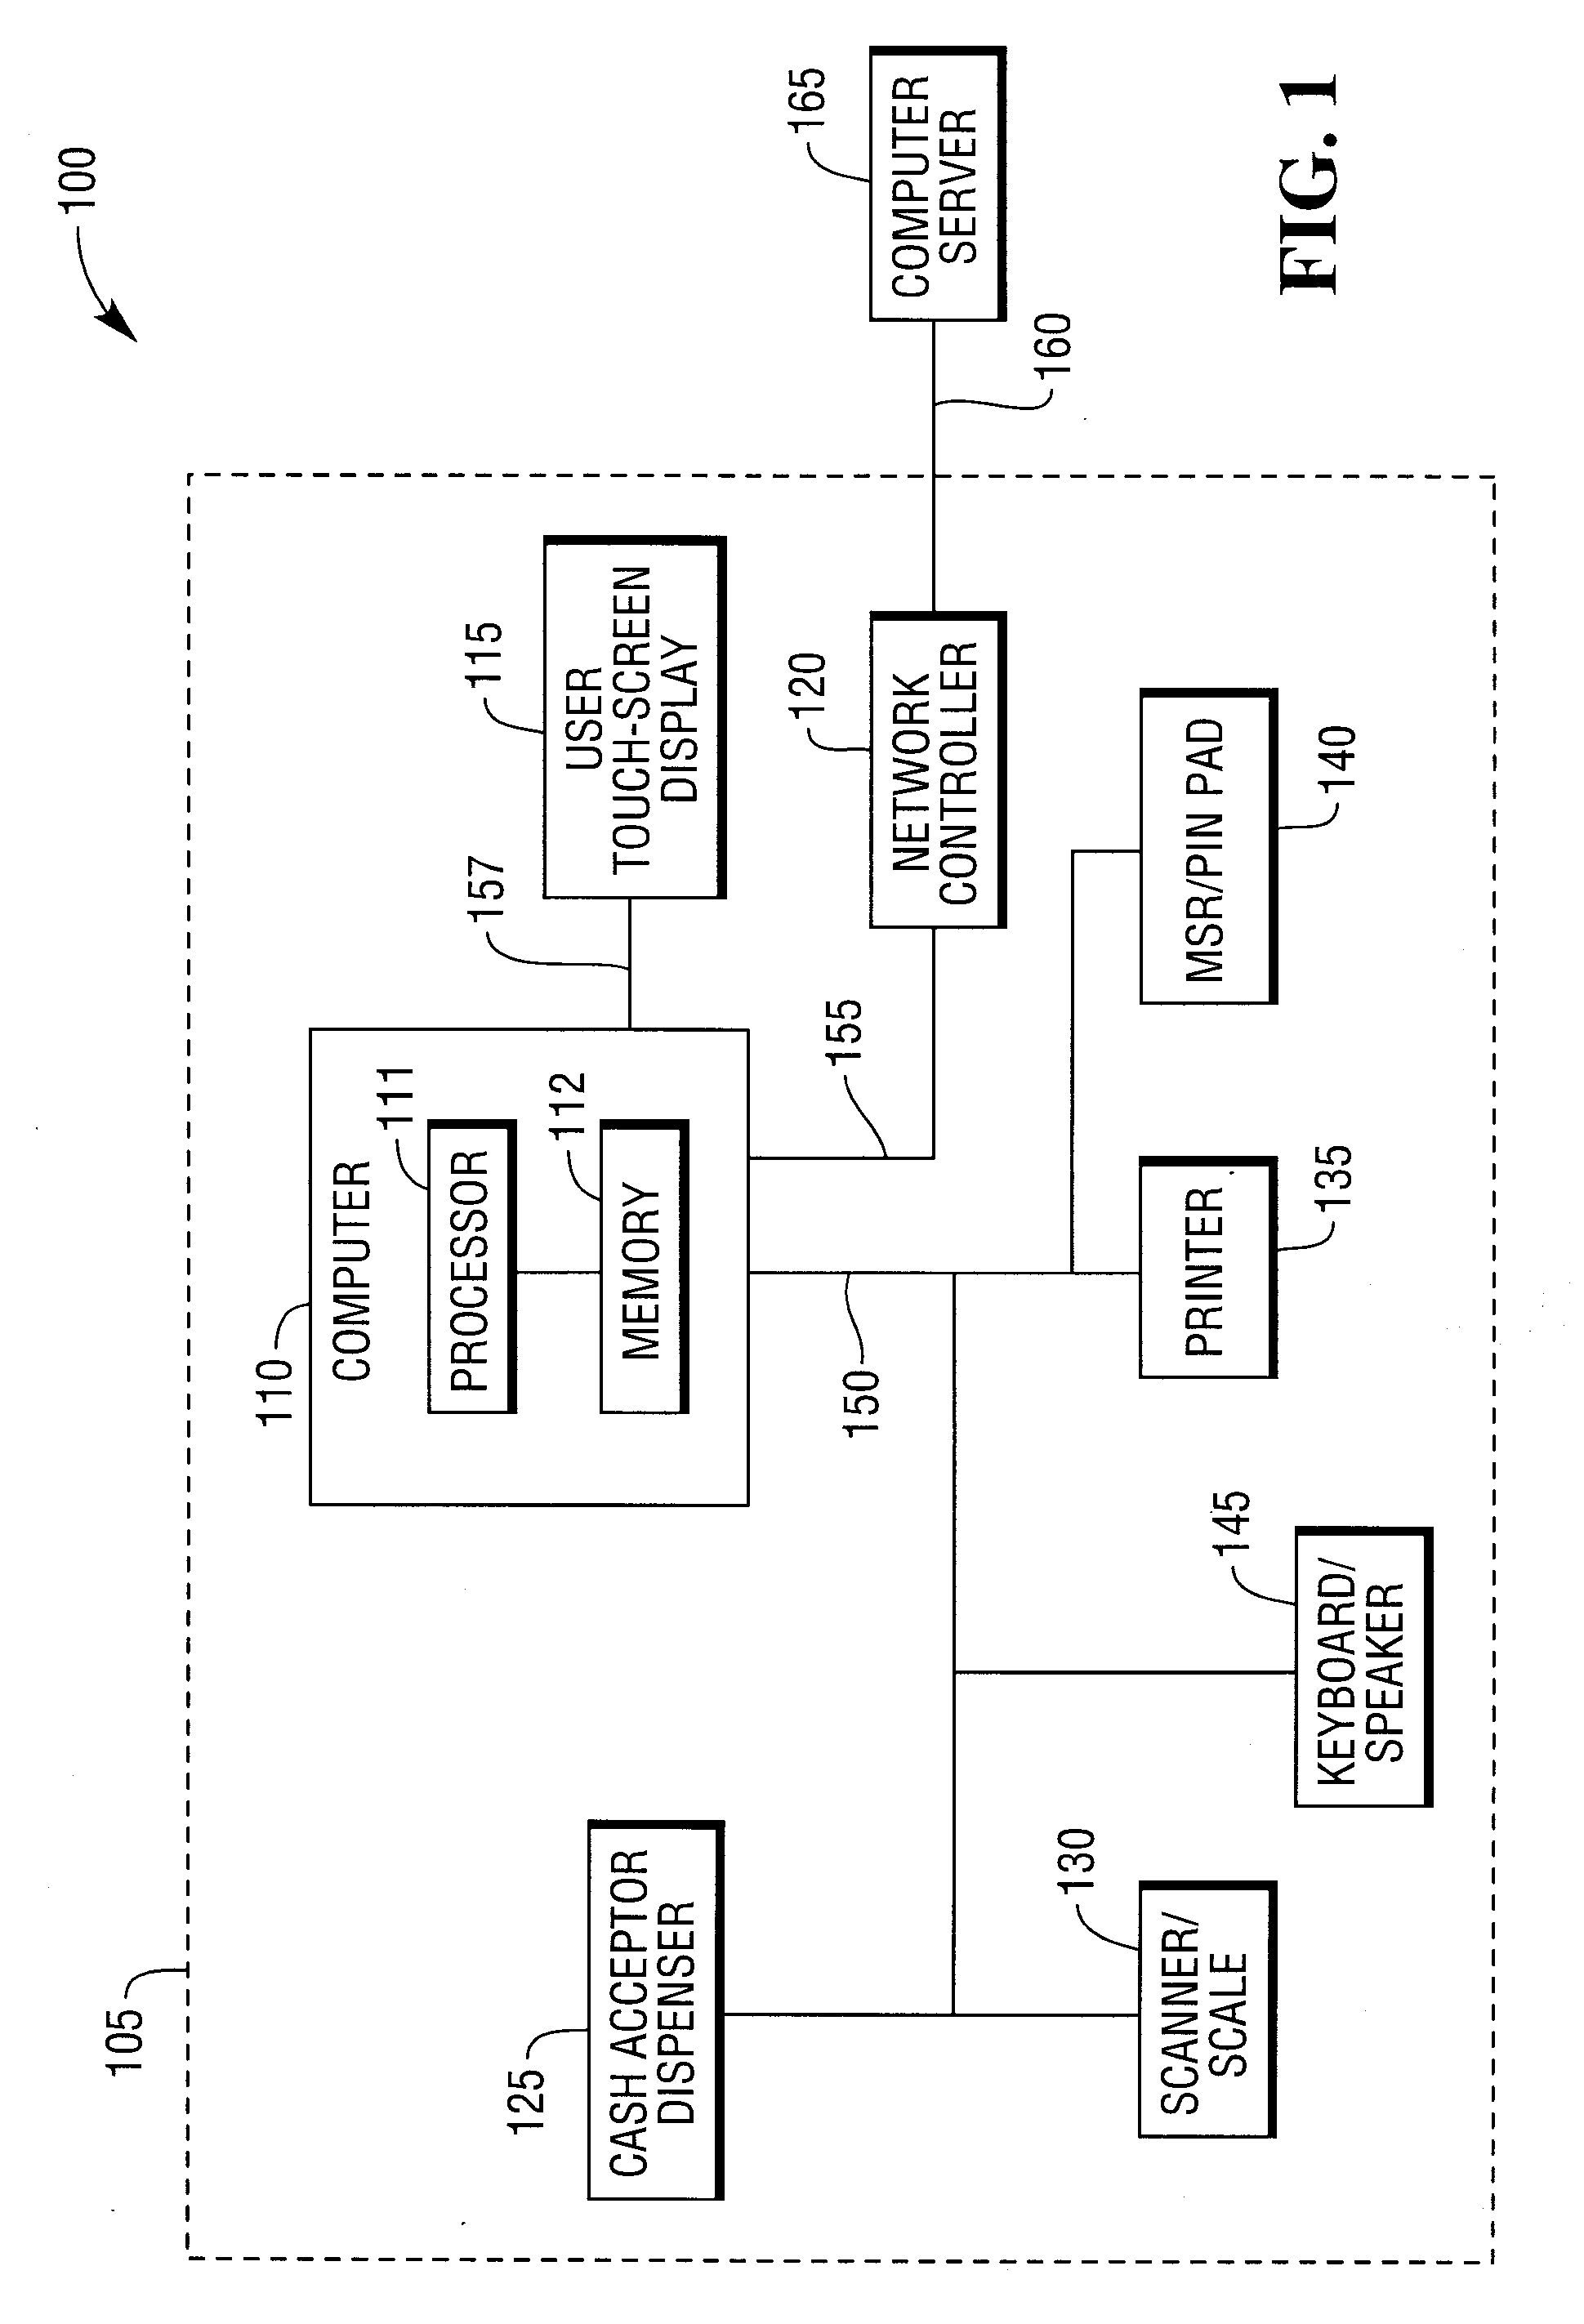 Navigation accessibilitly apparatus, method and system